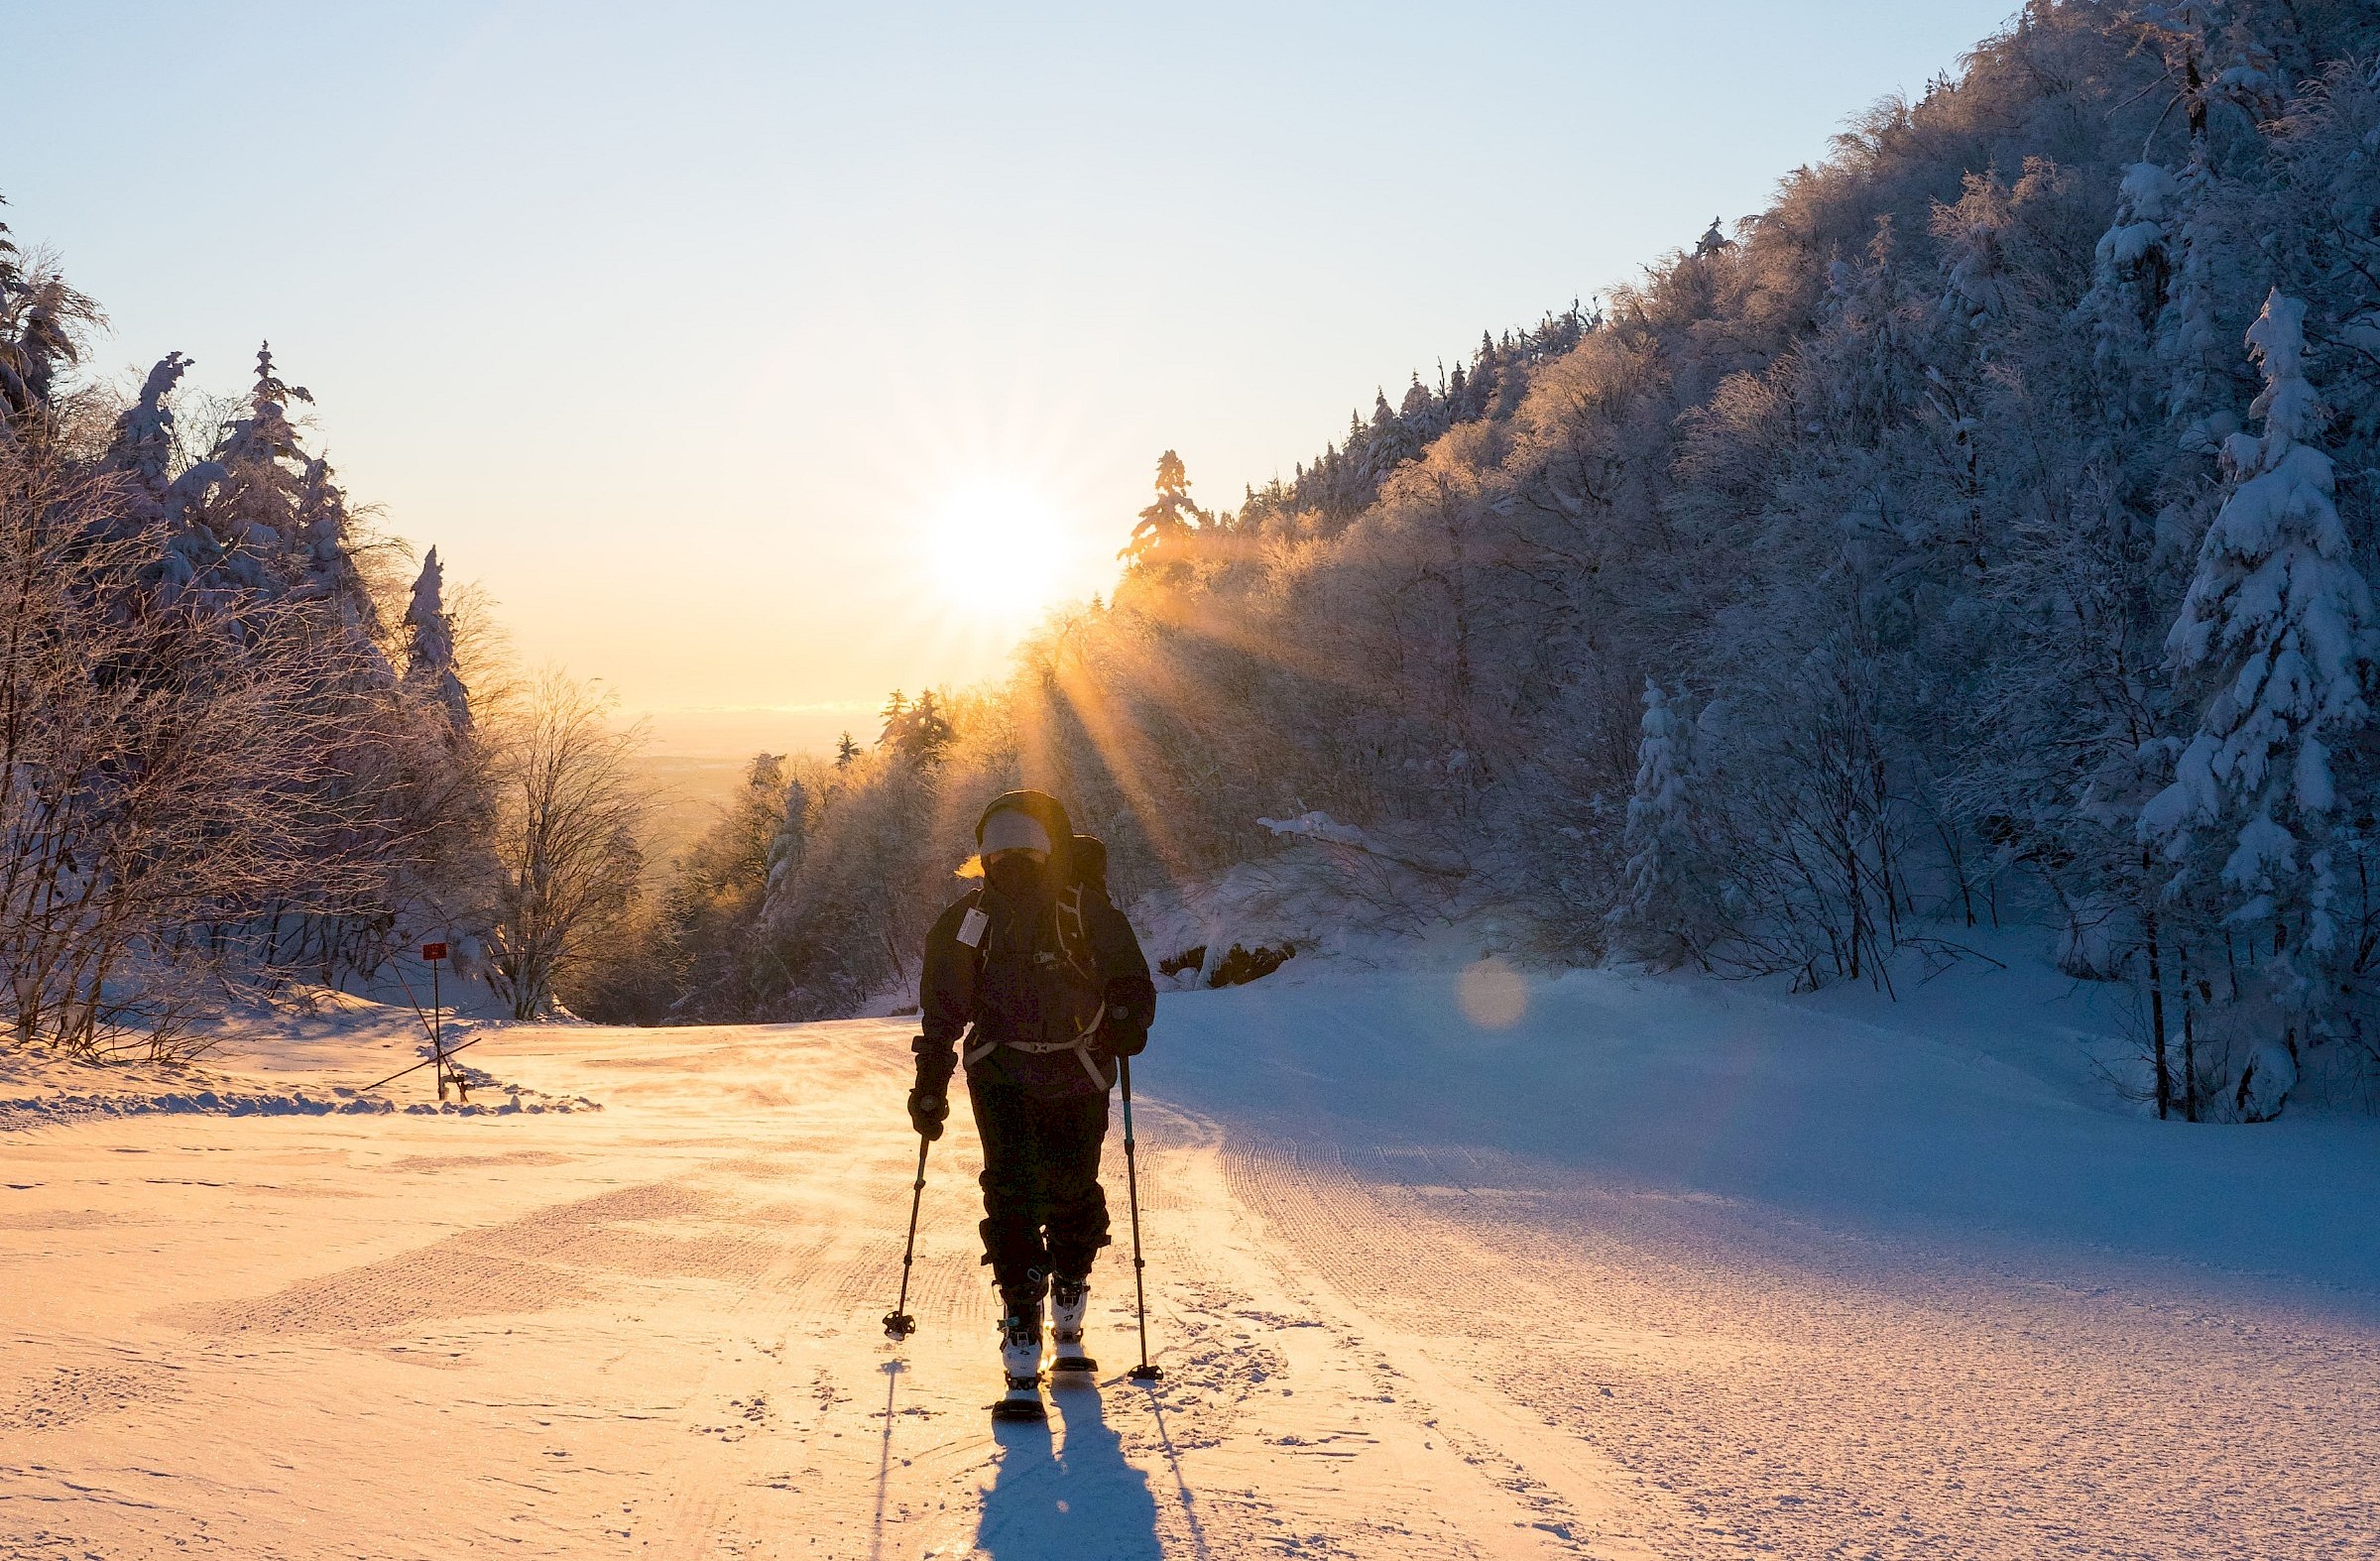 A person cross-country skiing at sunrise